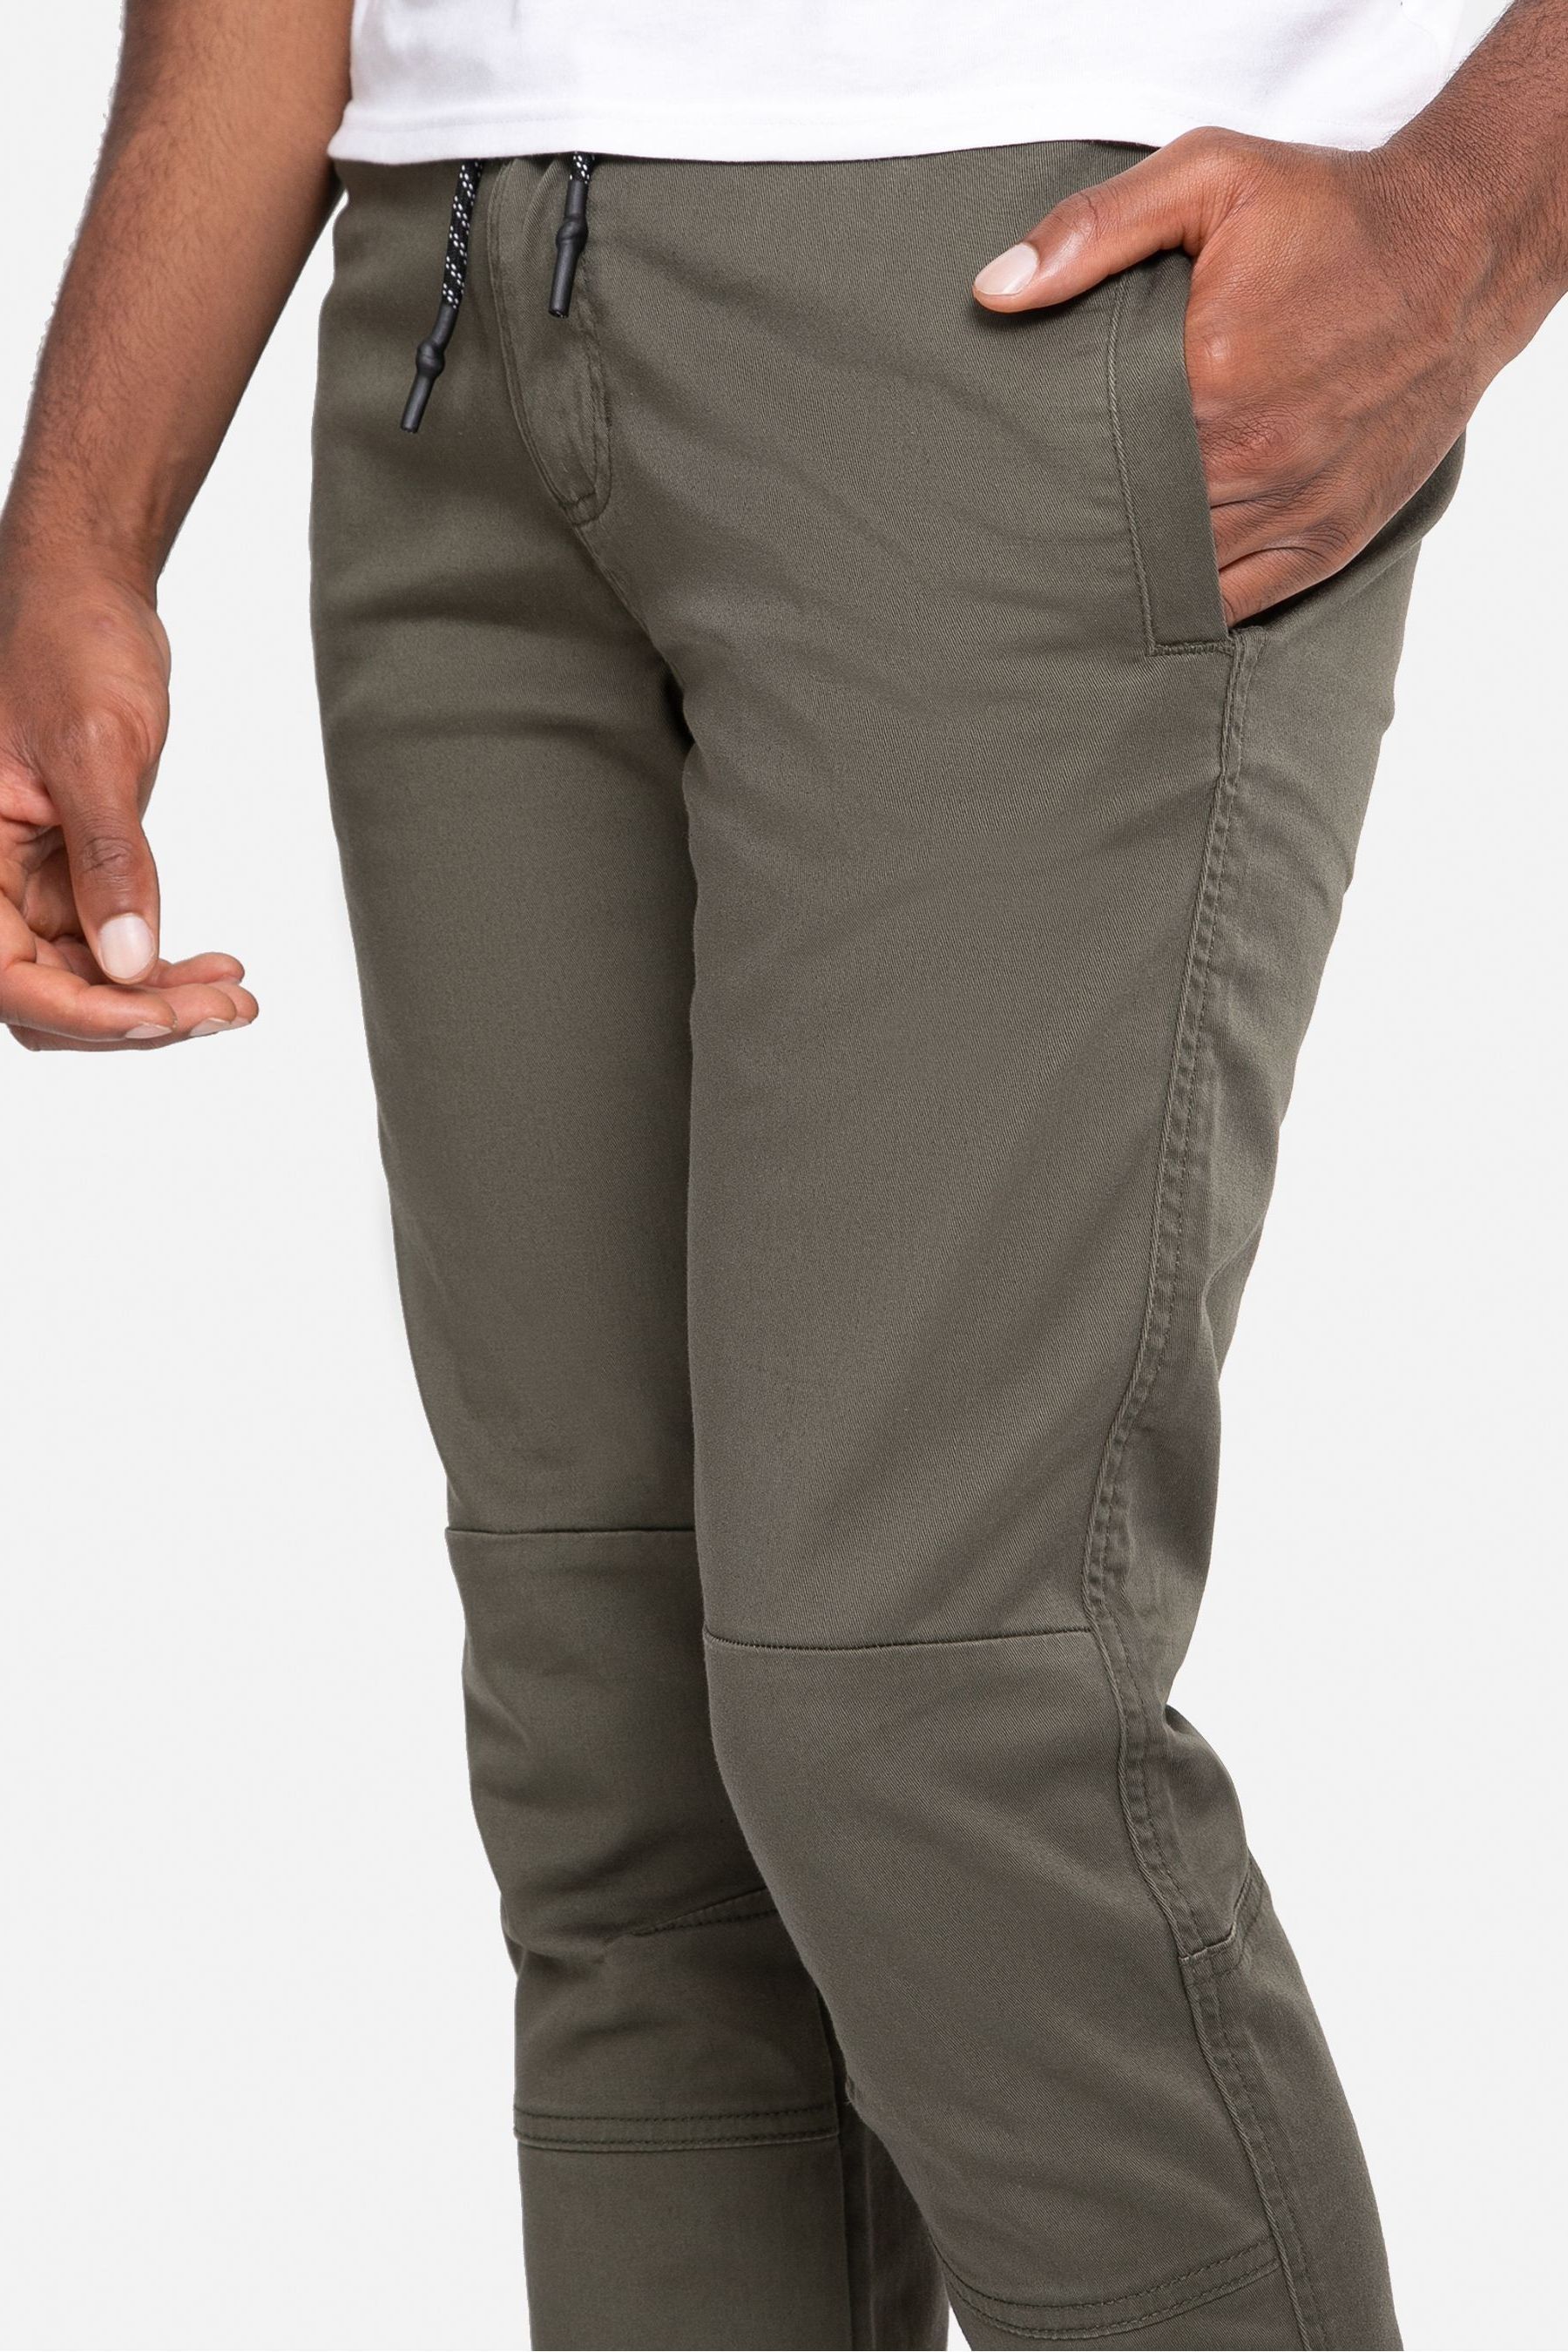 Buy Threadbare Carden Casual Trousers from the Next UK online shop